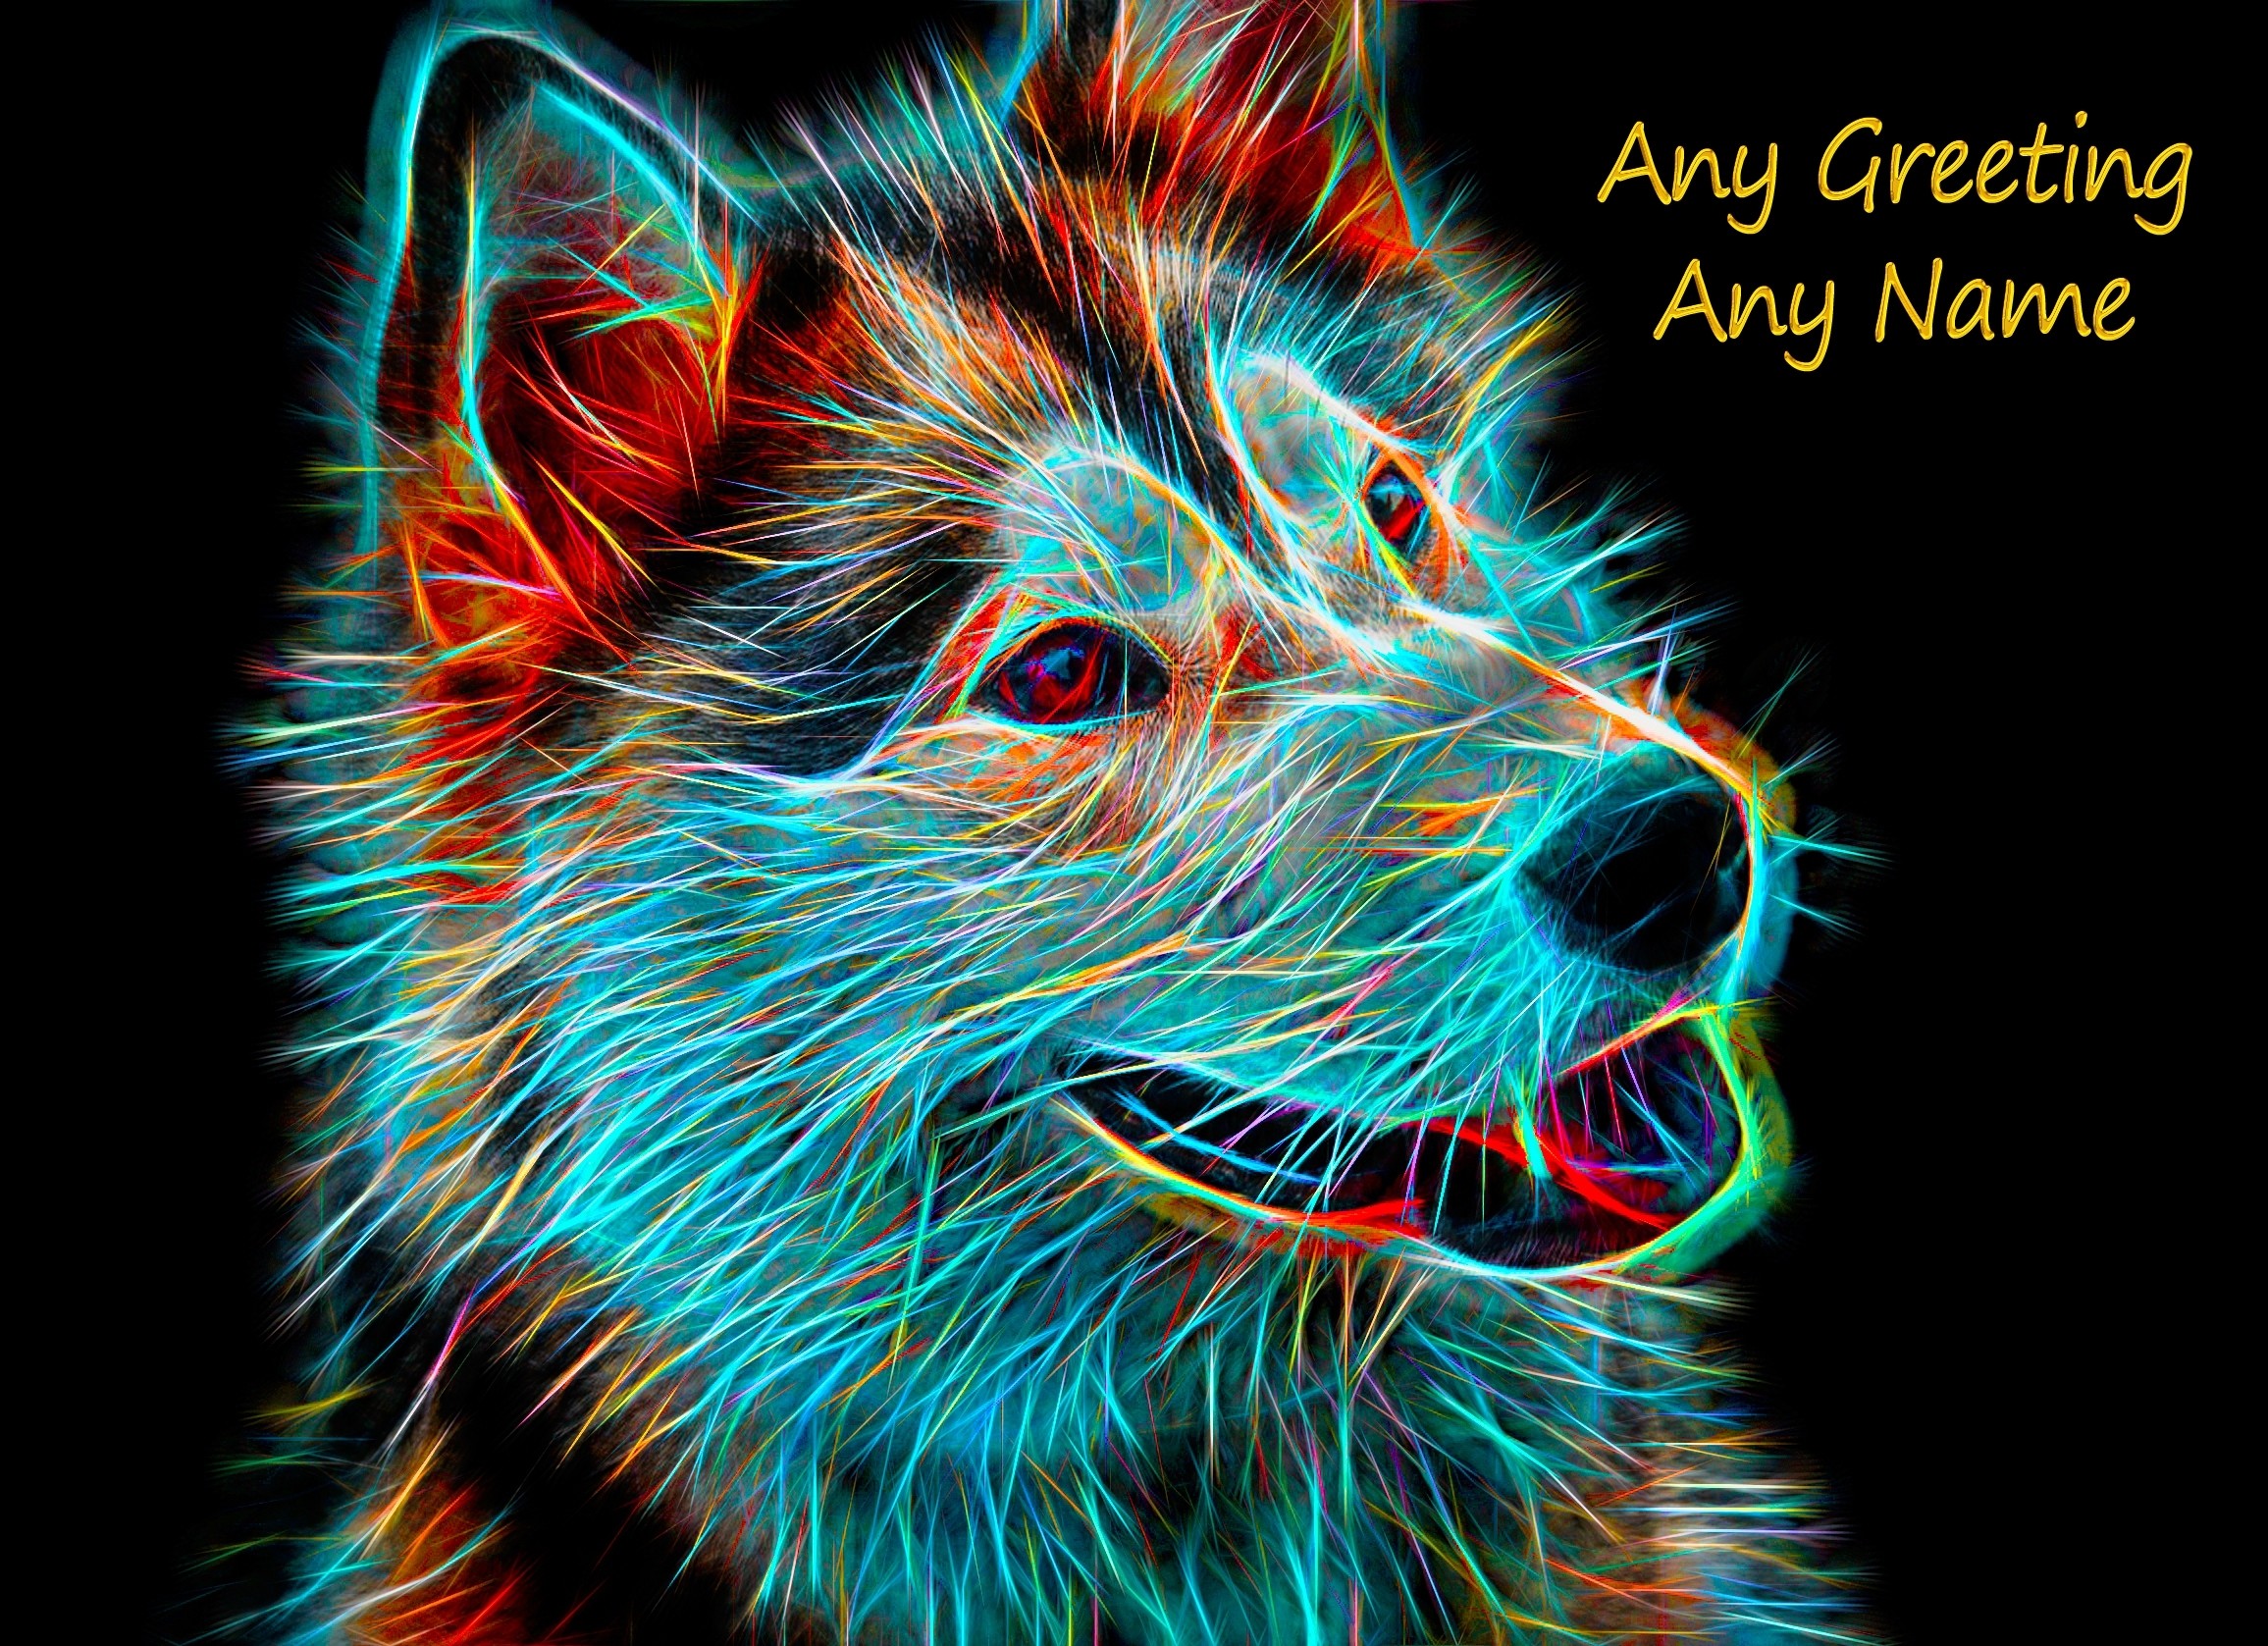 Personalised Husky Neon Art Greeting Card (Birthday, Christmas, Any Occasion)